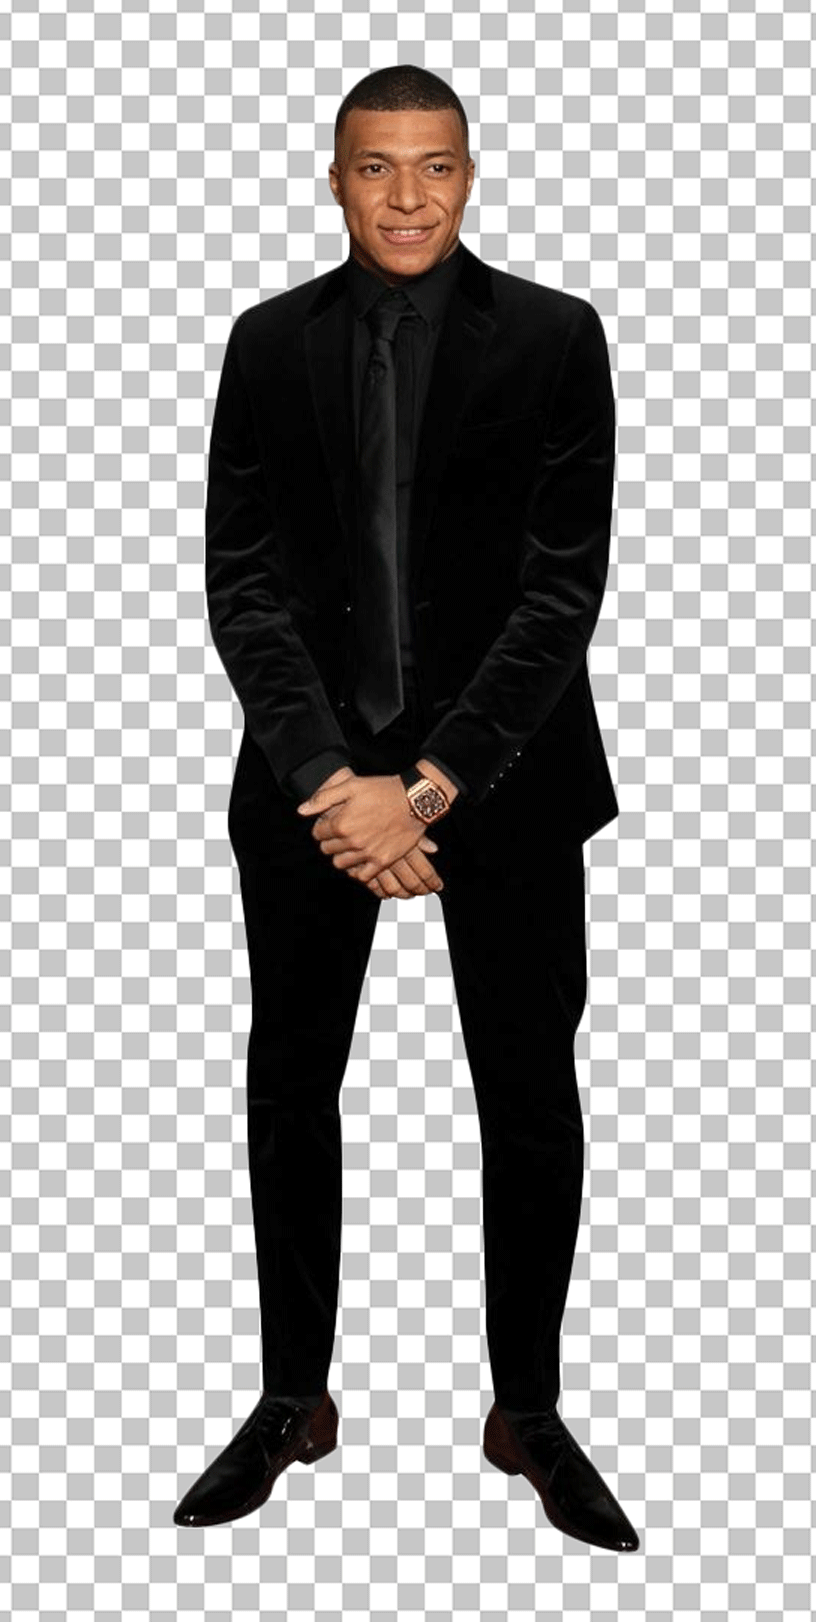 Kylian Mbappé standing in black Suit PNG image